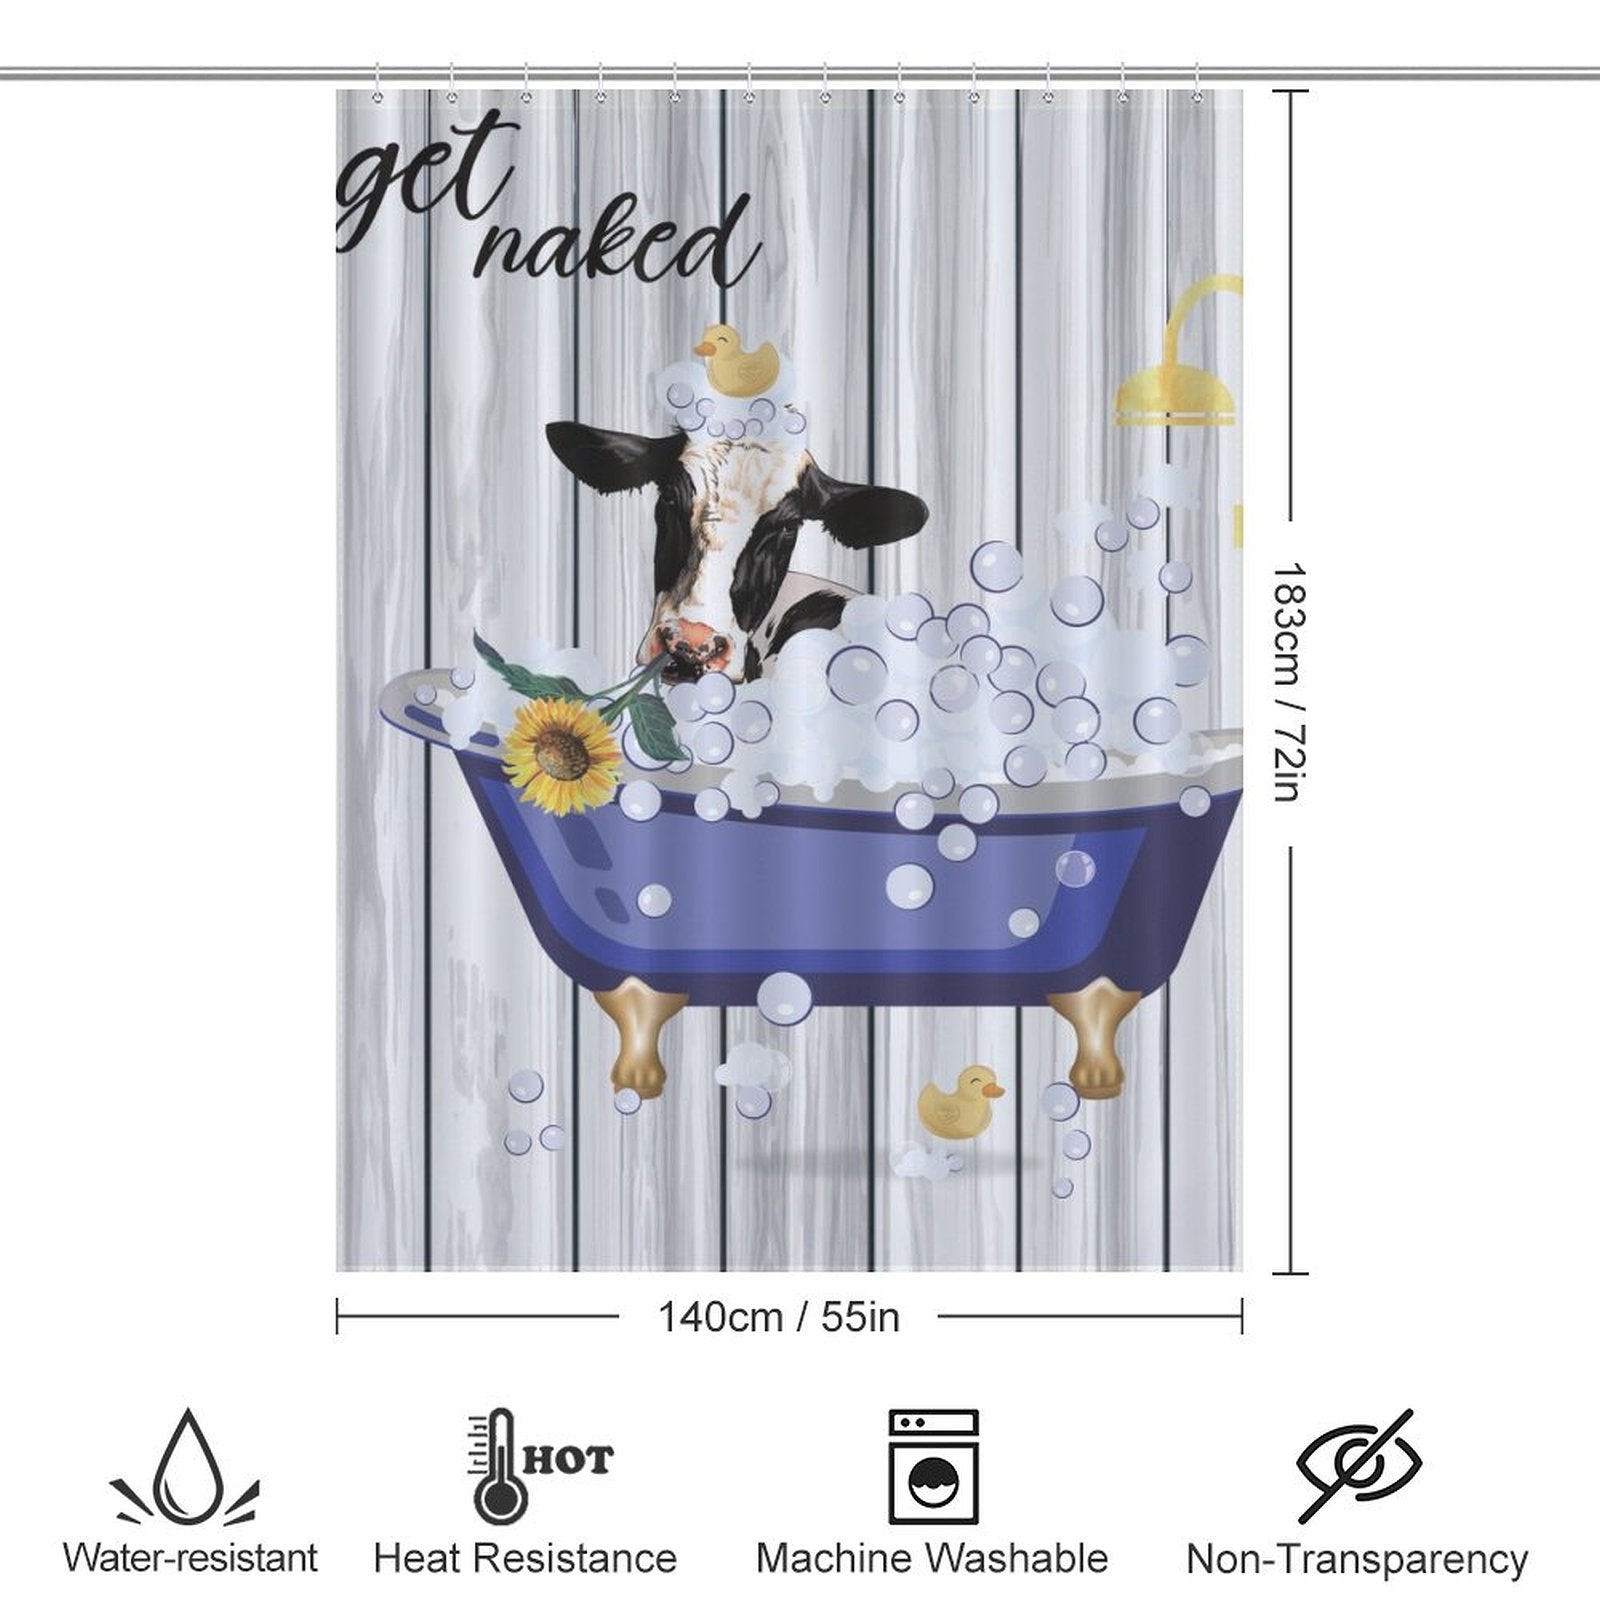 Funny Cow Sunflowers Get Naked Shower Curtain-Cottoncat by Cotton Cat featuring a cow in a bathtub with bubbles, rubber ducks, and sunflowers. The text "get naked" is printed at the top. Dimensions are 183 cm by 140 cm. Water-resistant and machine washable for easy care.